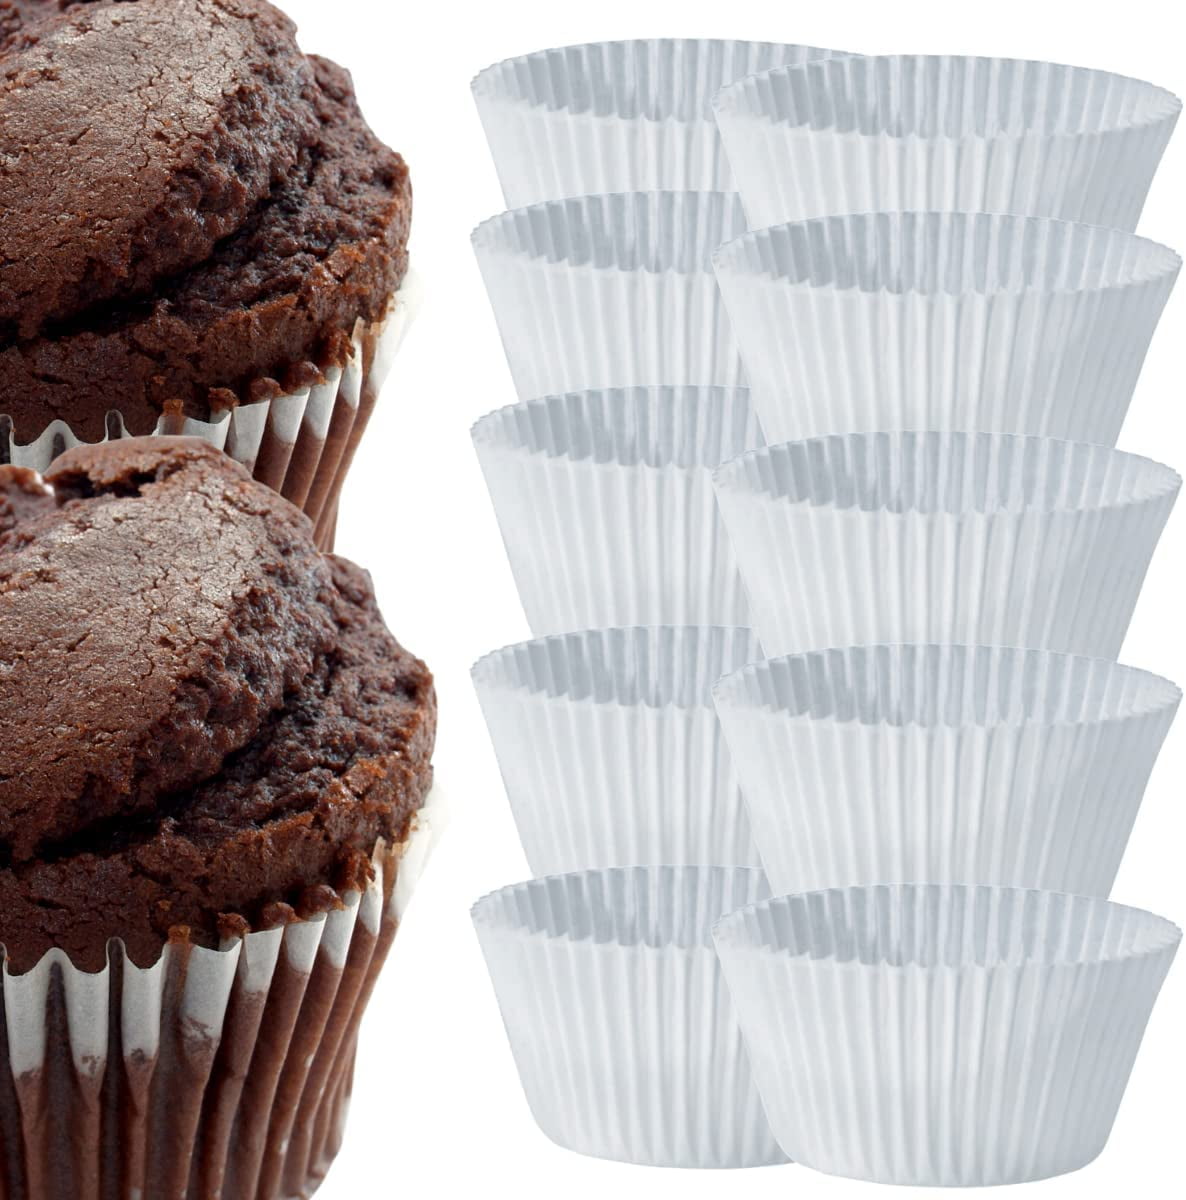 100 Piece Disposable Paper Cup Cupcake Muffin Baking Chocolate Cake Baking 